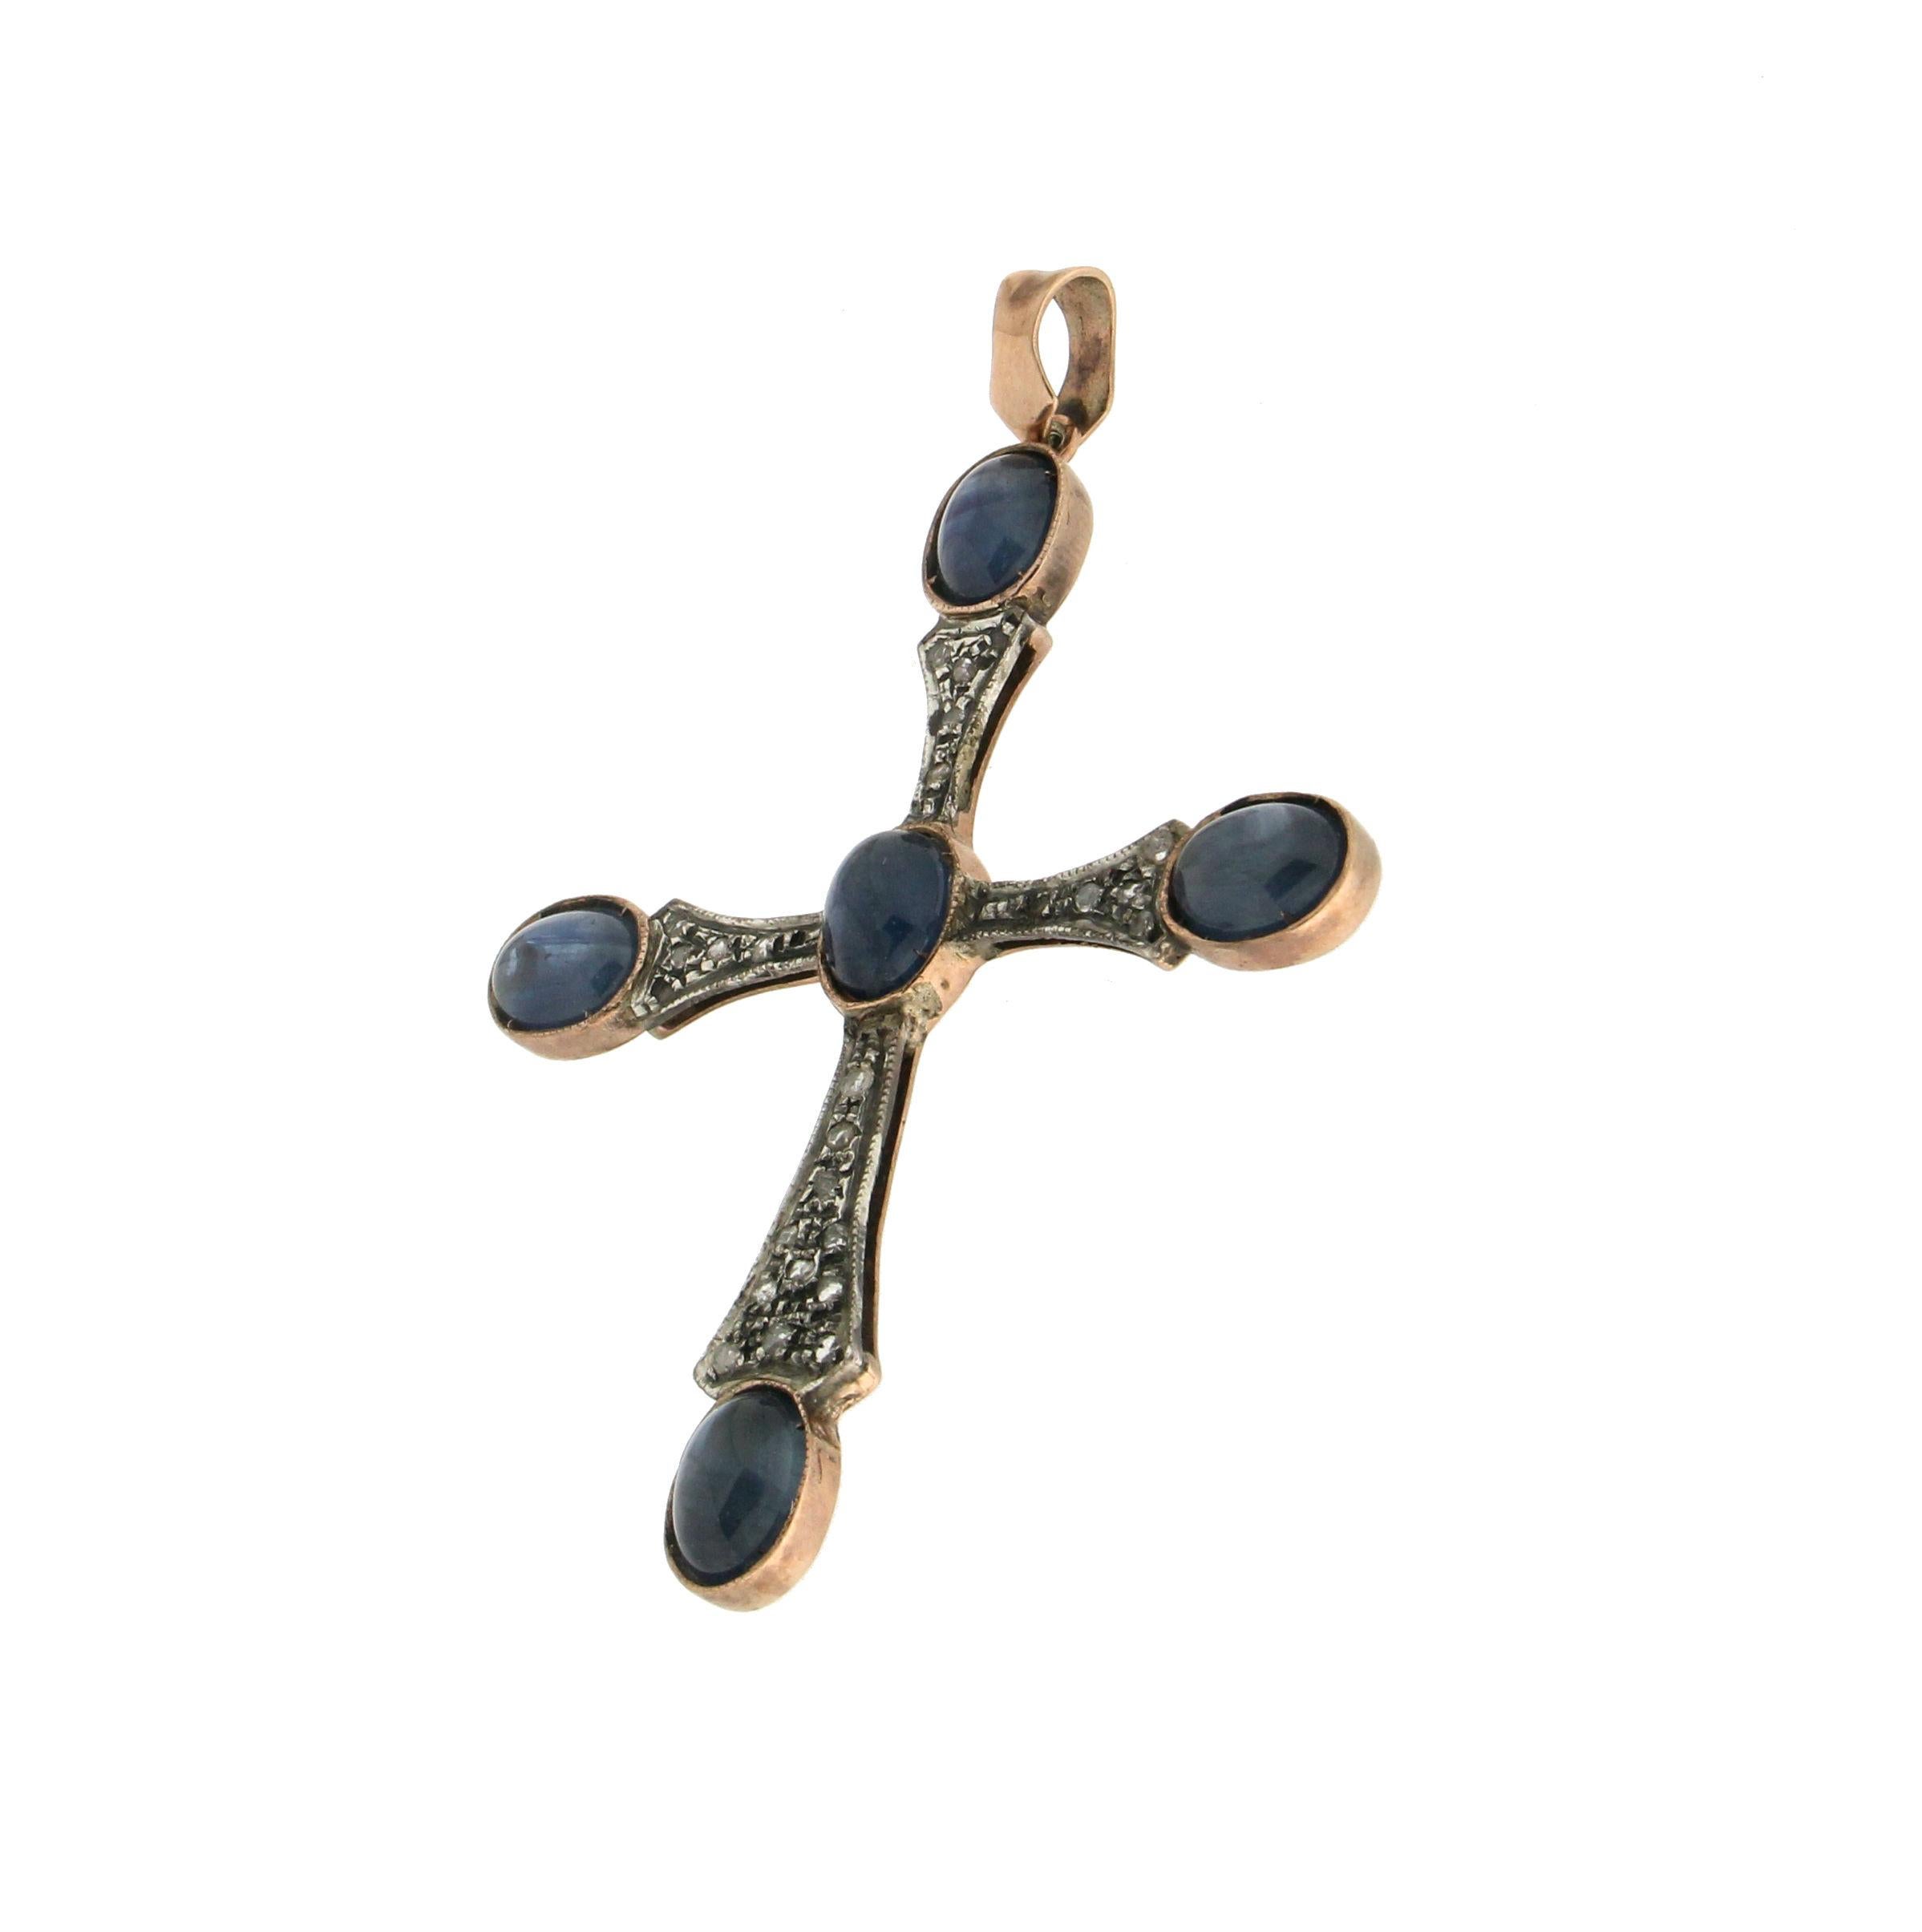 9 karat yellow gold and silver pendant necklace. Handmade by artisans and assembled with sapphires and 
 old cut diamonds

Diamonds weight 0.44 karat
Pendant total weight 9.80 grams
(the price is without chain)